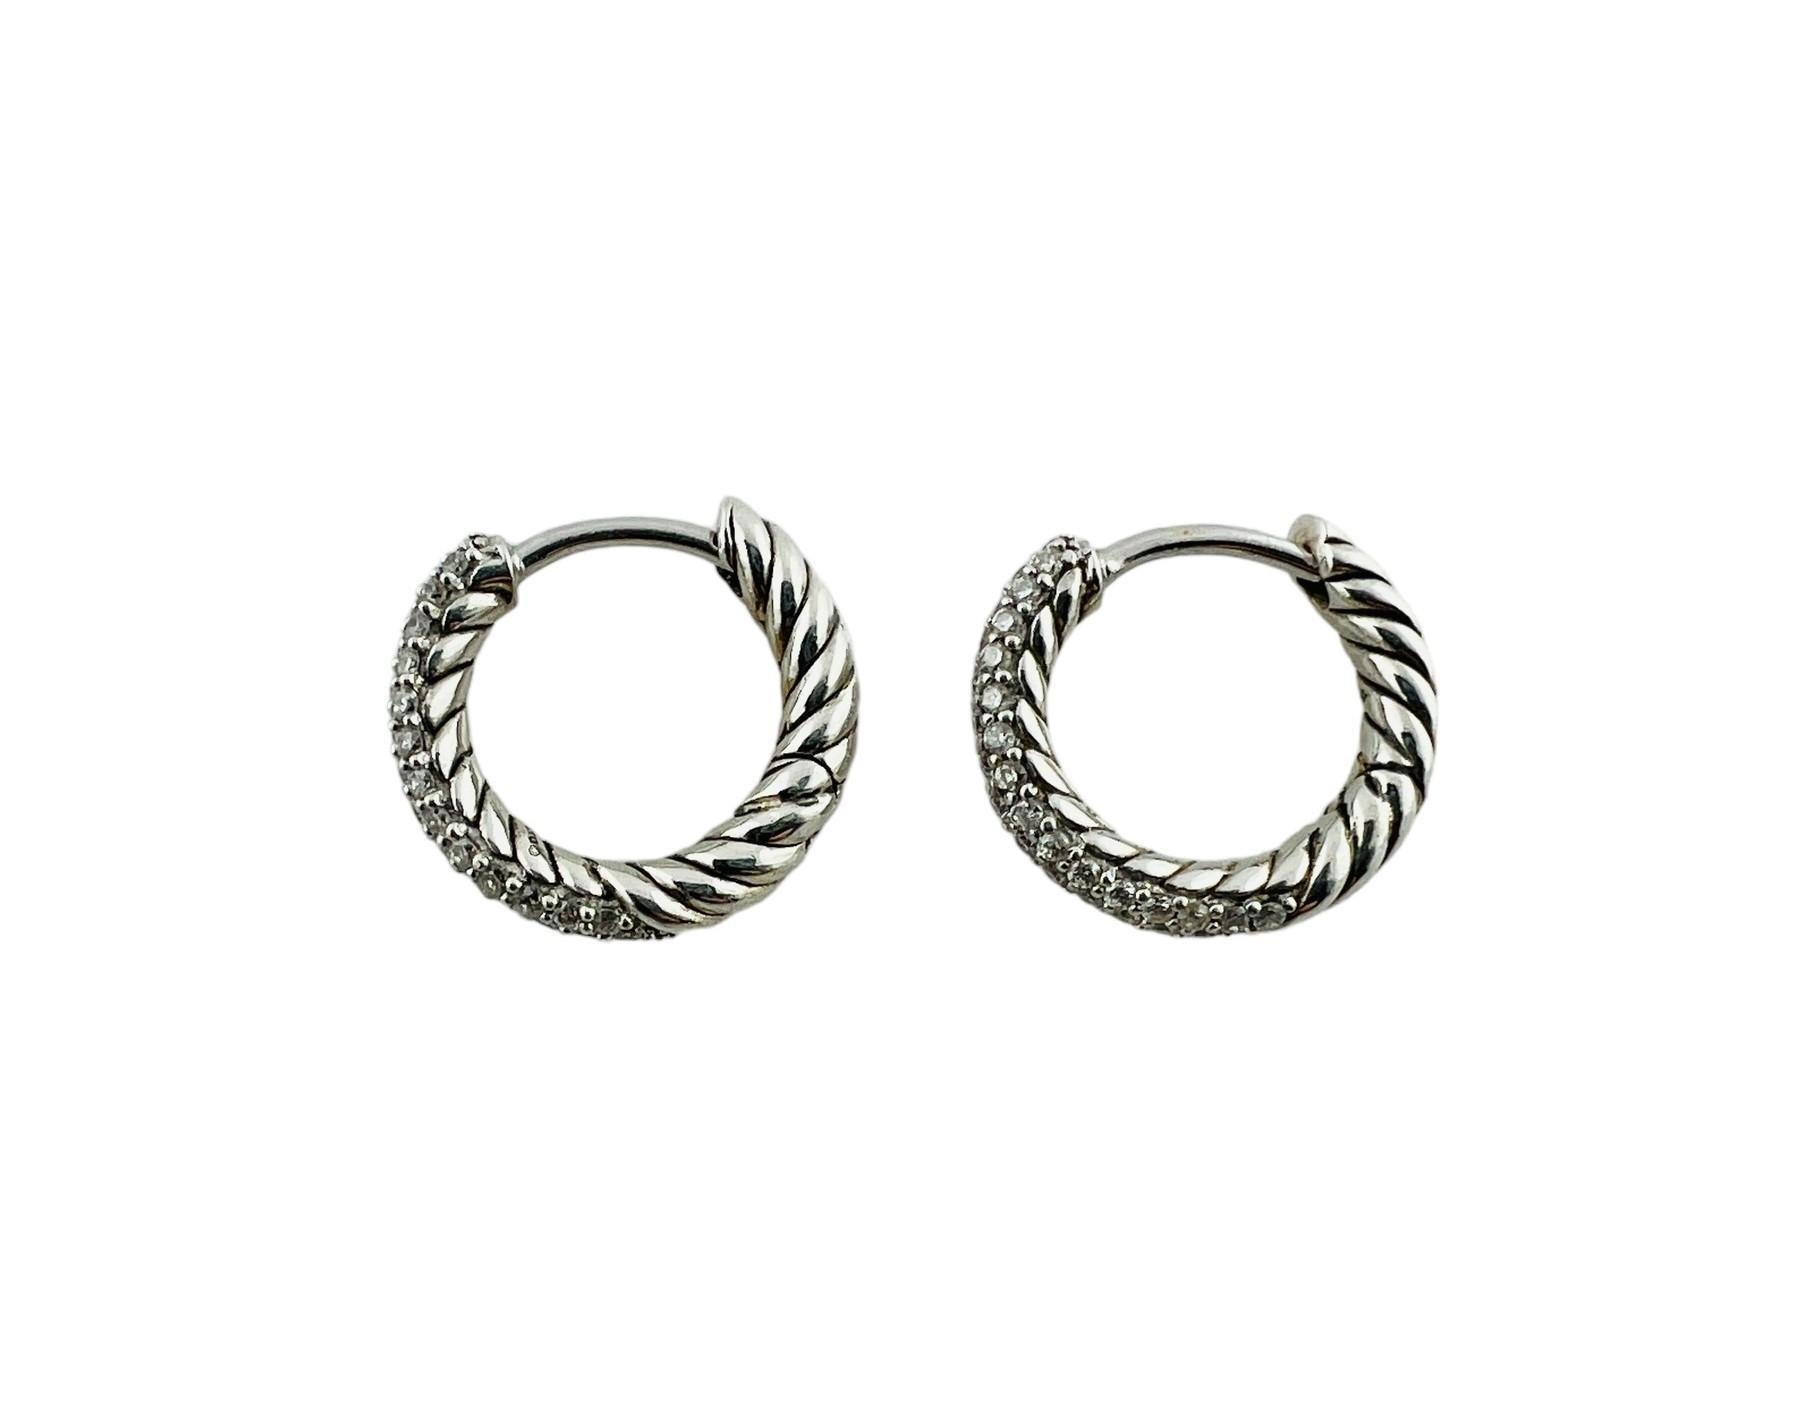 Vintage David Yurman Sterling Silver and Diamond Petite Pave Hoop Earrings-

These sparkling hinged hoop earrings by David Yurman are decorated with pave set diamonds in beautifully detailed sterling silver.

Total diamond weight:  .37 ct.

Size: 